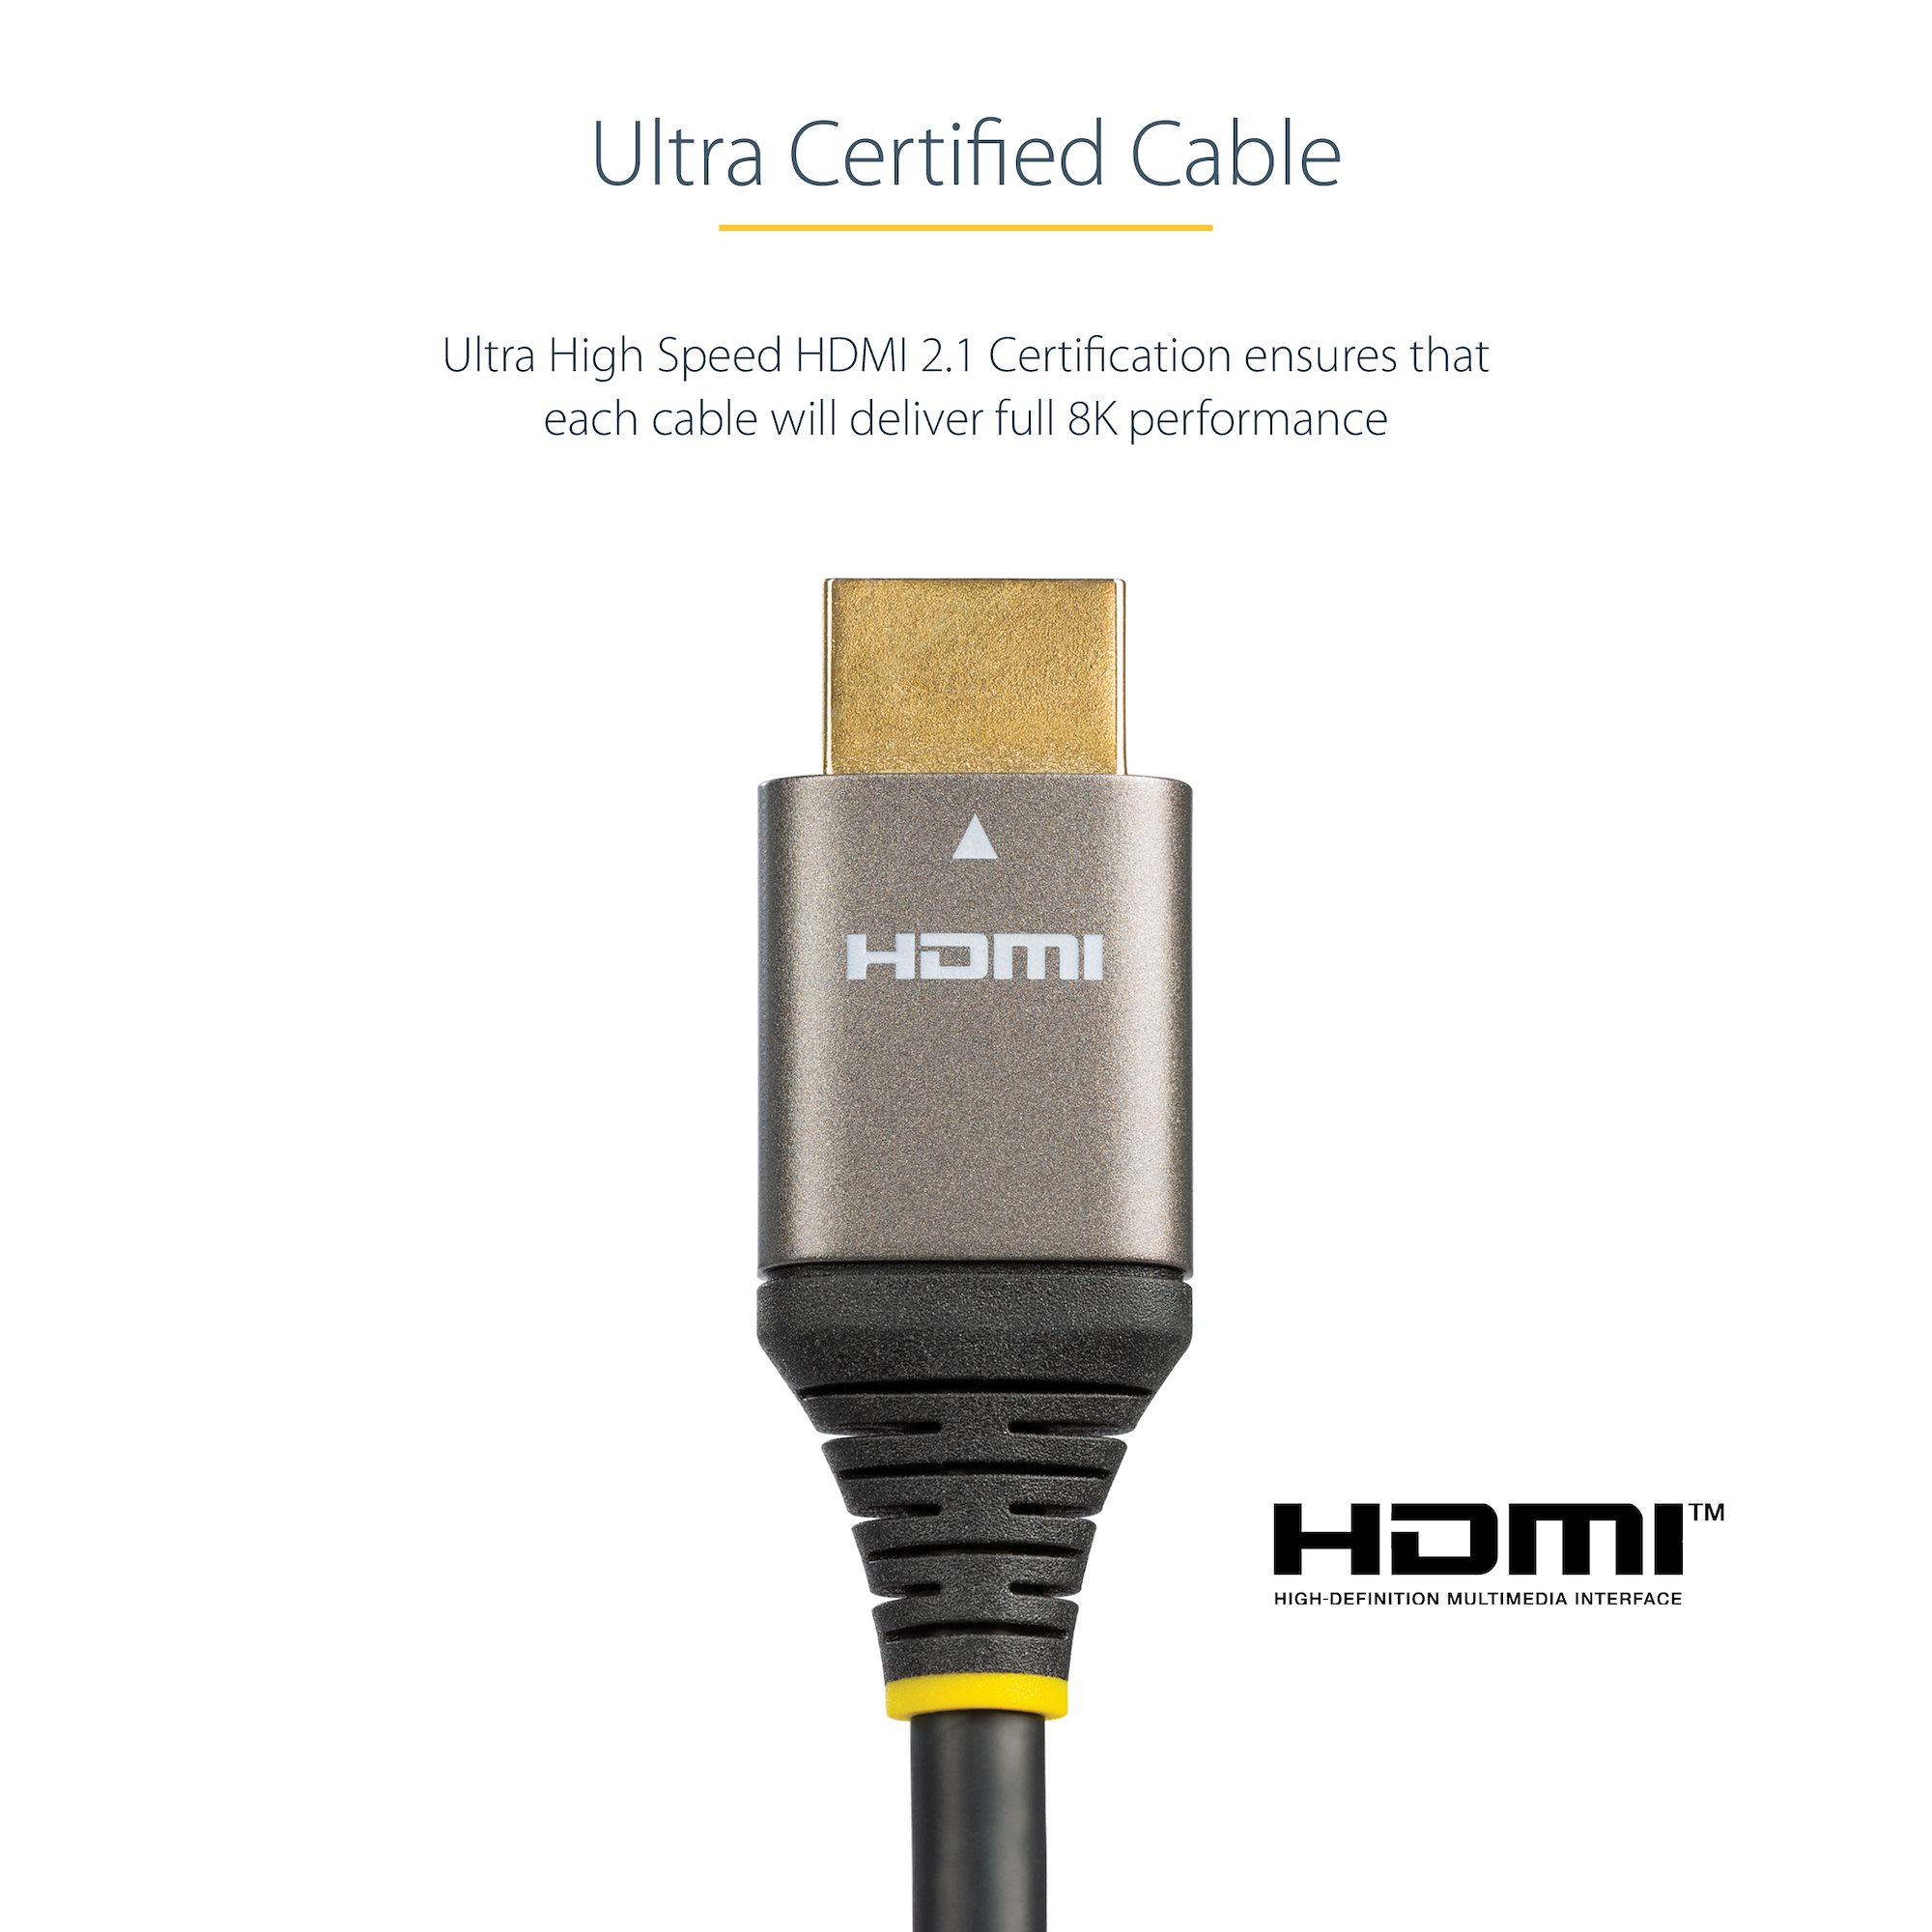 StarTech.com 5m High Speed HDMI Cable – Ultra HD 4k x 2k HDMI Cable – HDMI  to HDMI M/M - 5 meter HDMI 1.4 Cable - Audio/Video Gold-Plated  (HDMM5M),Black : Electronics 